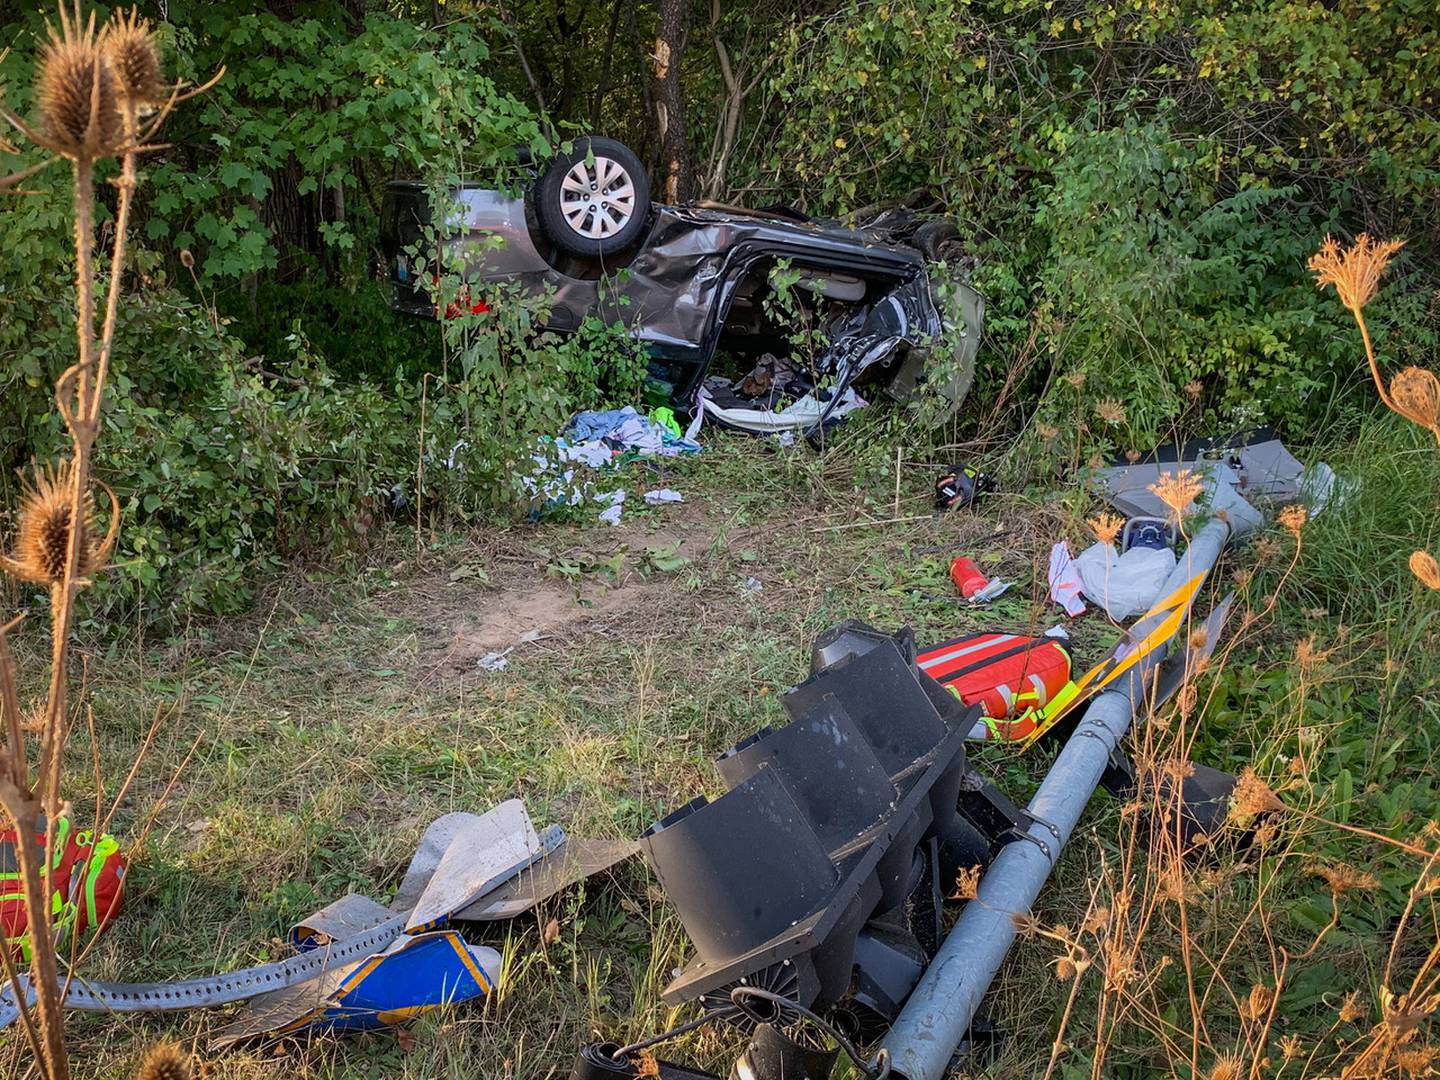 A two-vehicle crash at Route 23 and West Coral Road Wednesday, Sept. 29, 2021, resulted in three people being taken to the hospital with serious injuries, the Marengo Fire Protection District chief said. Two of those people later died.